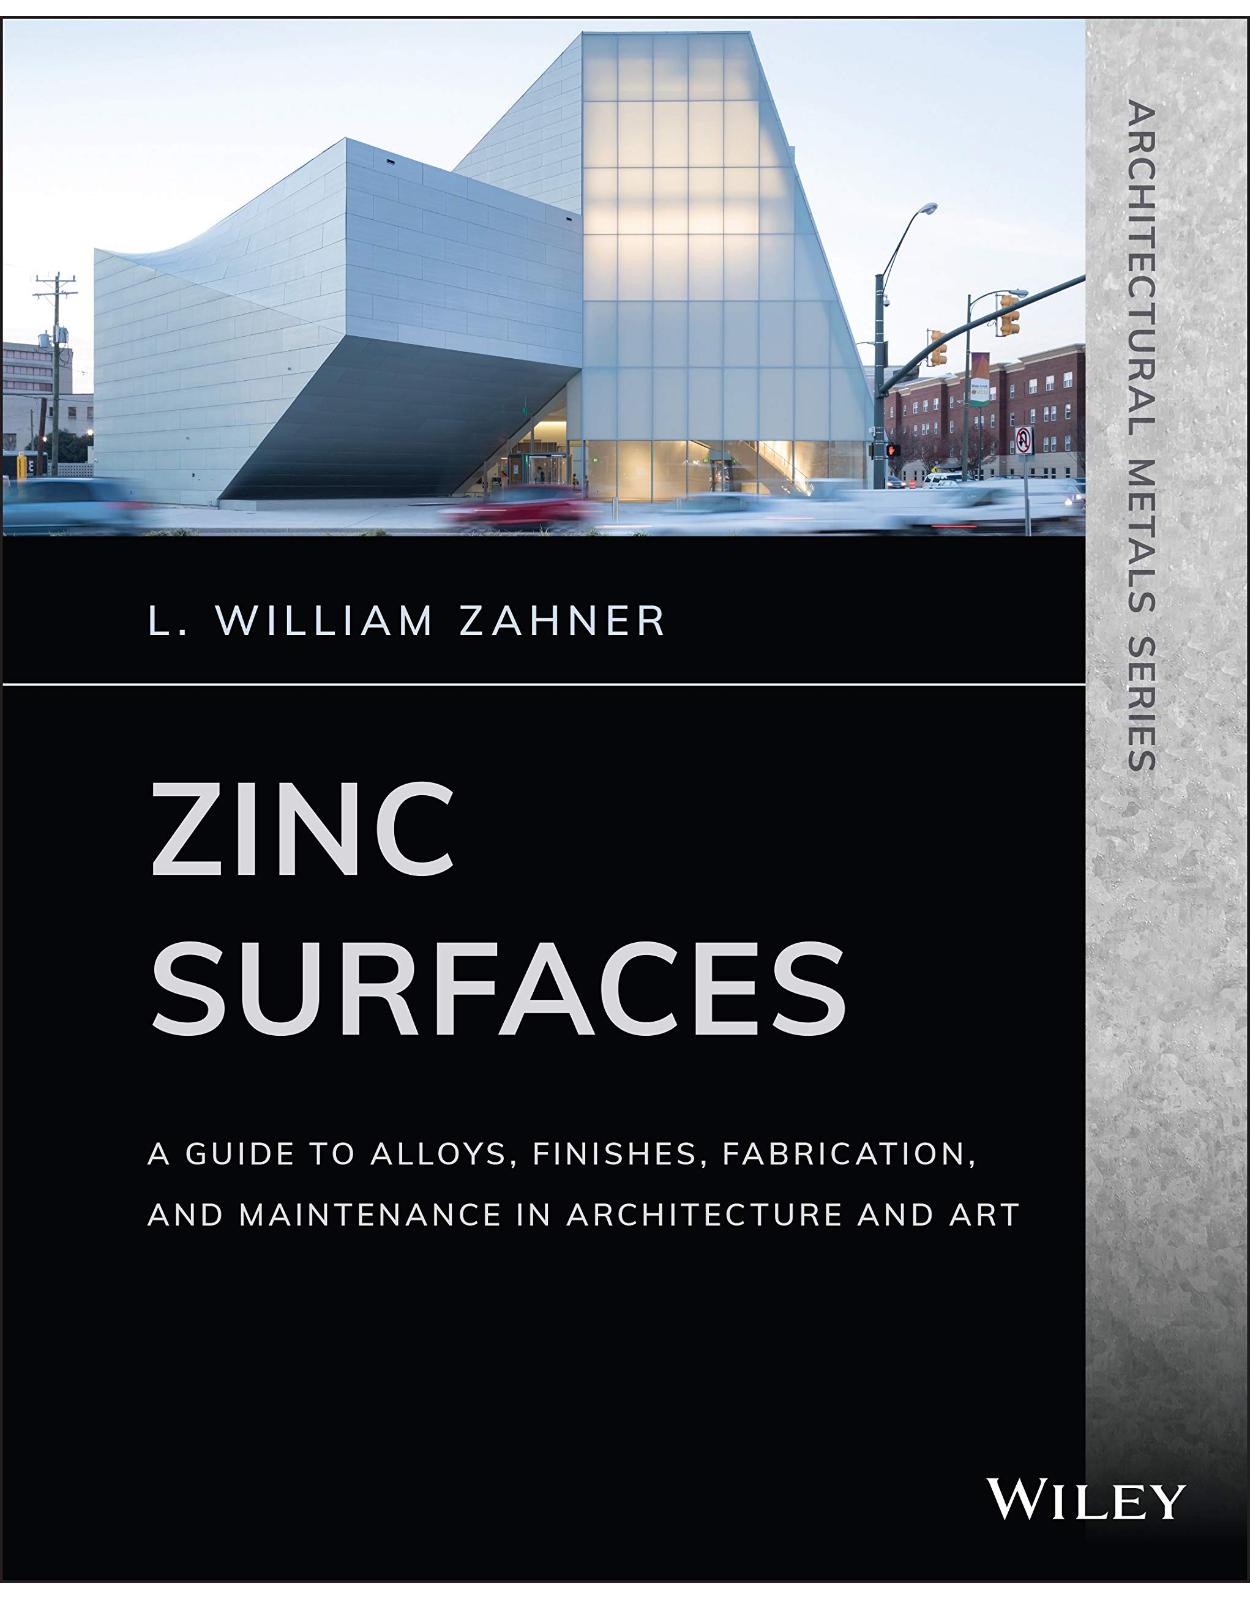 Zinc Surfaces: A Guide to Alloys, Finishes, Fabrication, and Maintenance in Architecture and Art (Architectural Metals Series)